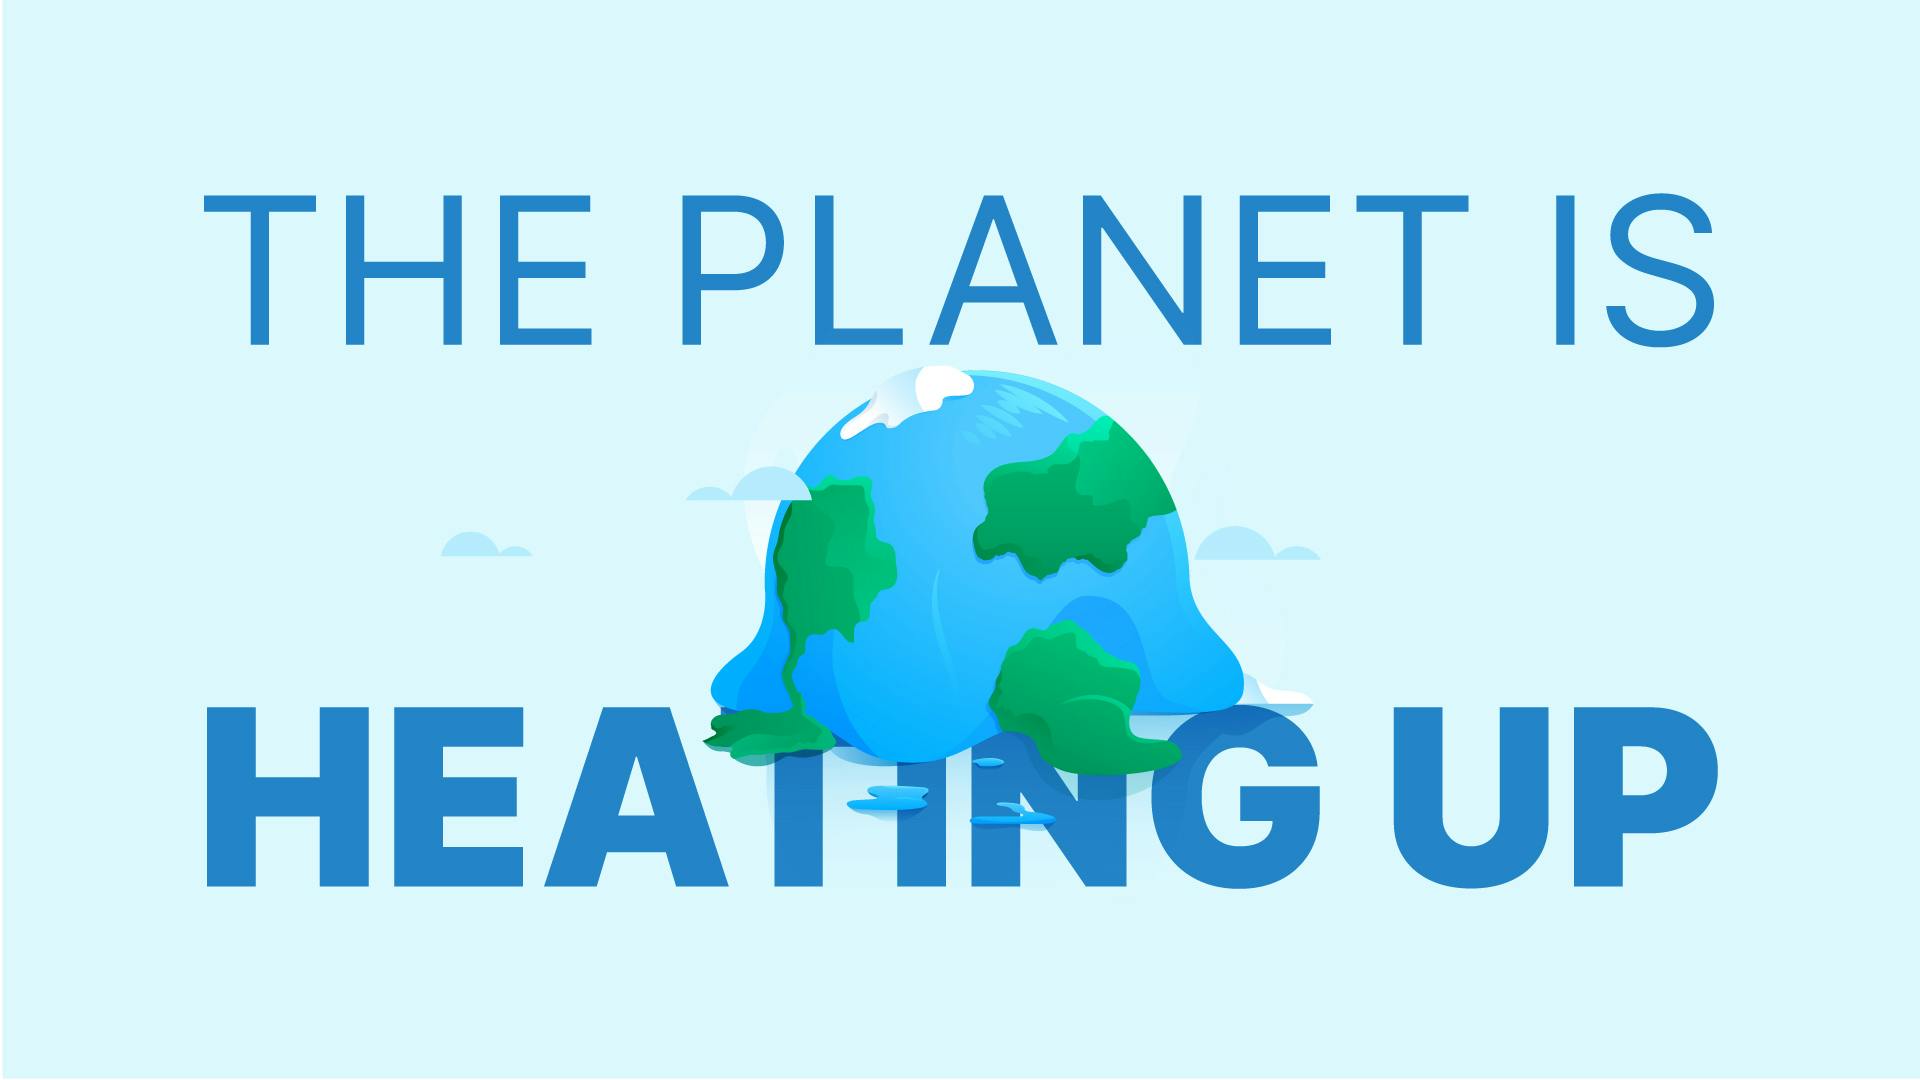 The Planet Is Heating Up: Here’s What You Can Do